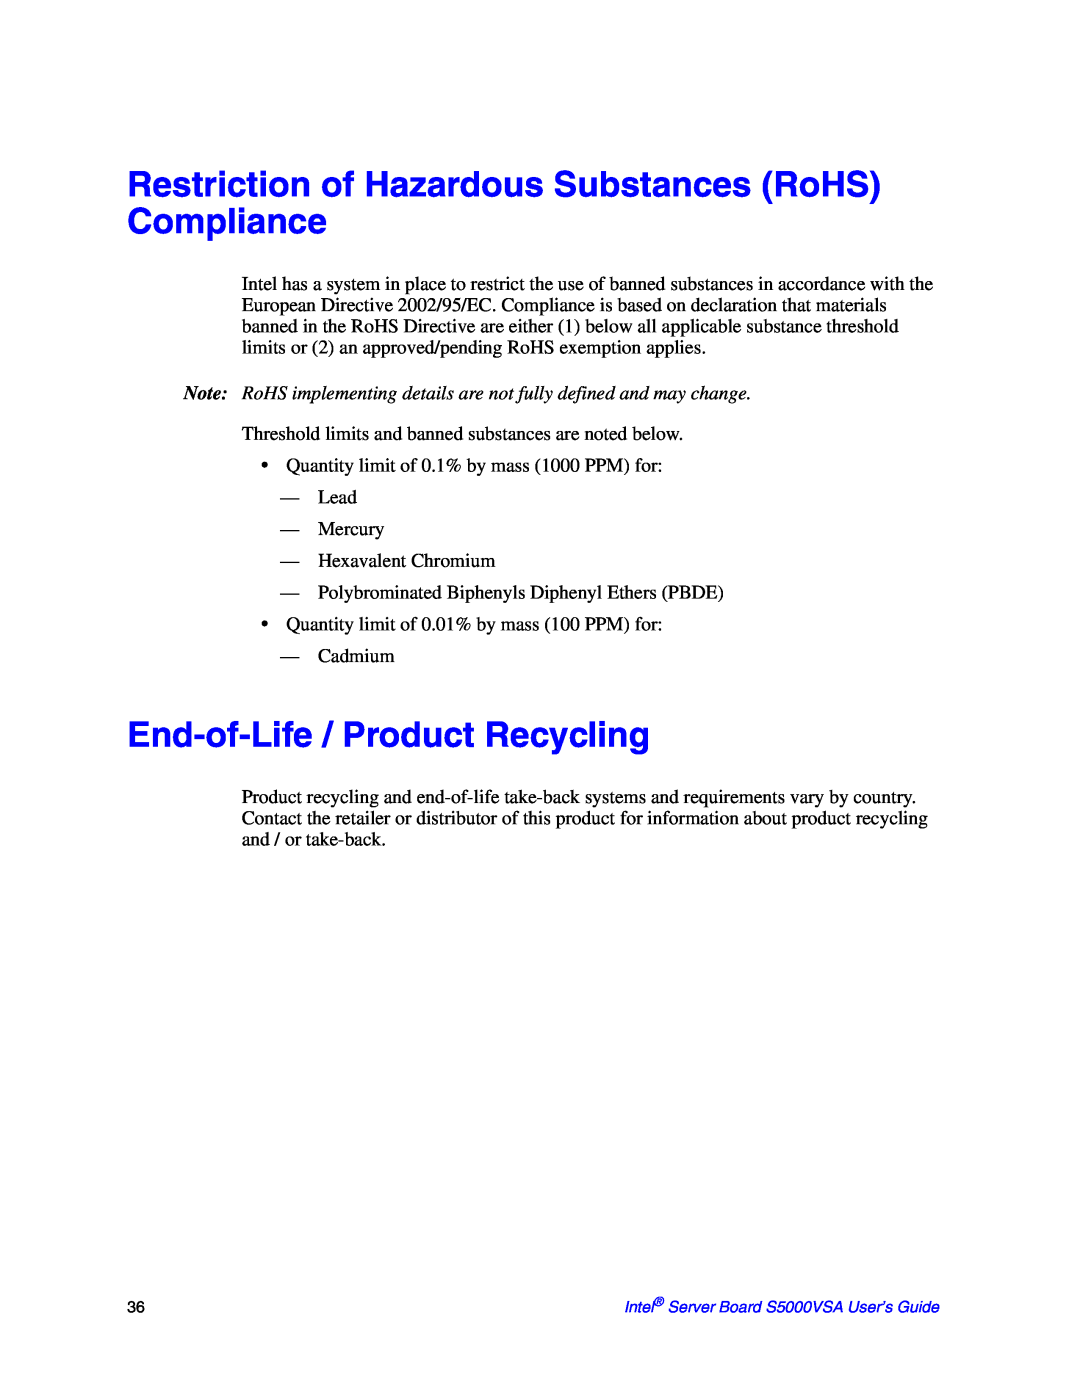 Intel S5000VSA manual Restriction of Hazardous Substances RoHS Compliance, End-of-Life / Product Recycling 